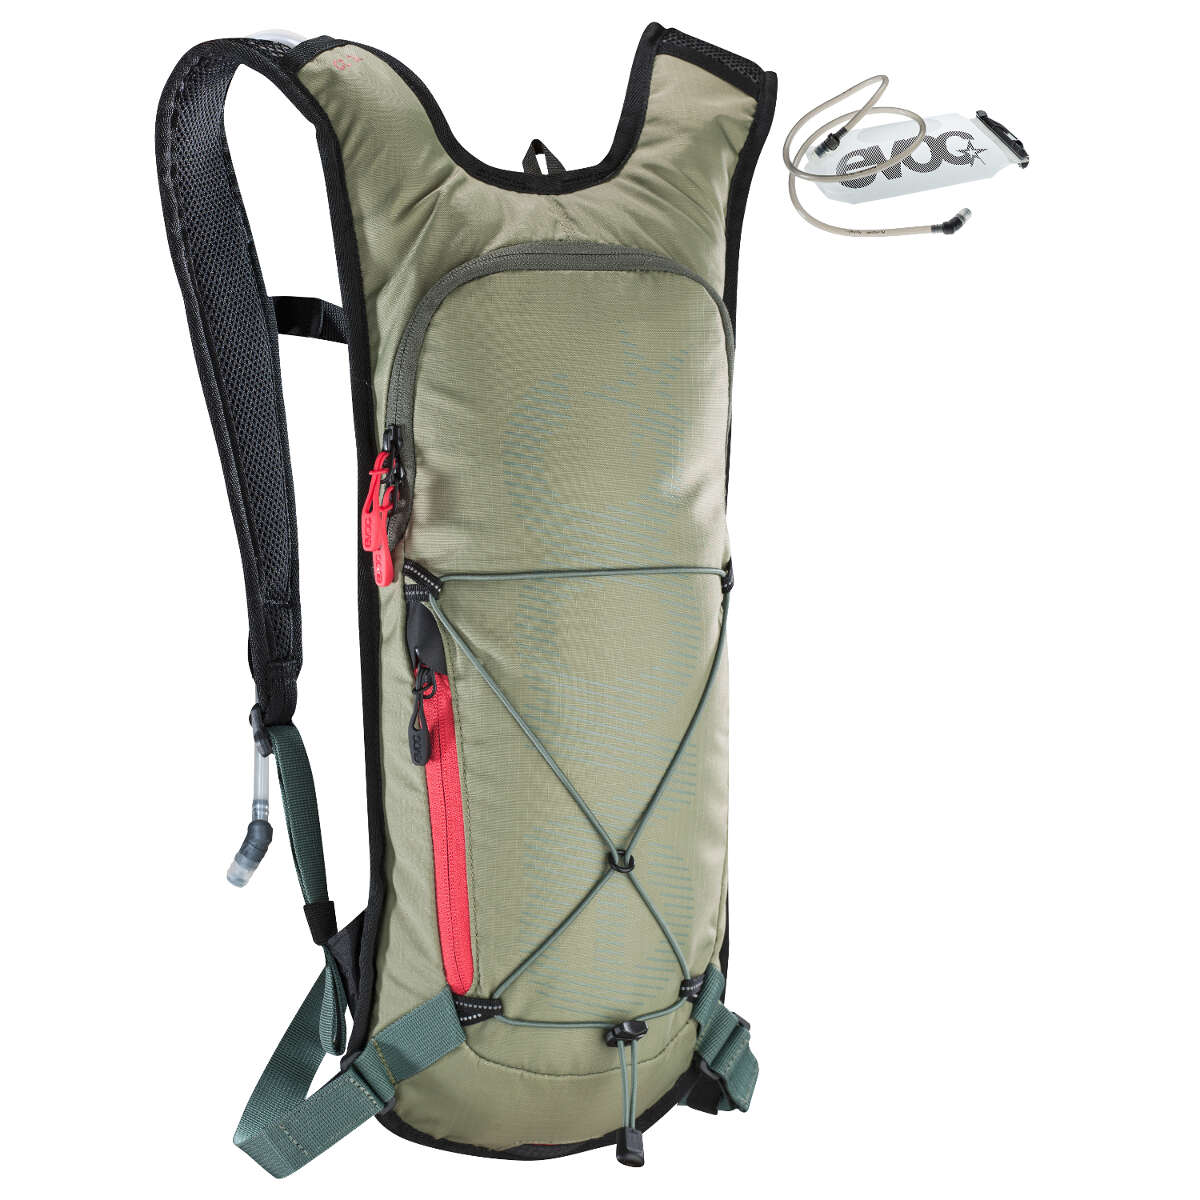 Evoc Backpack with Hydration System Cross Country Light Olive, 3 Liter